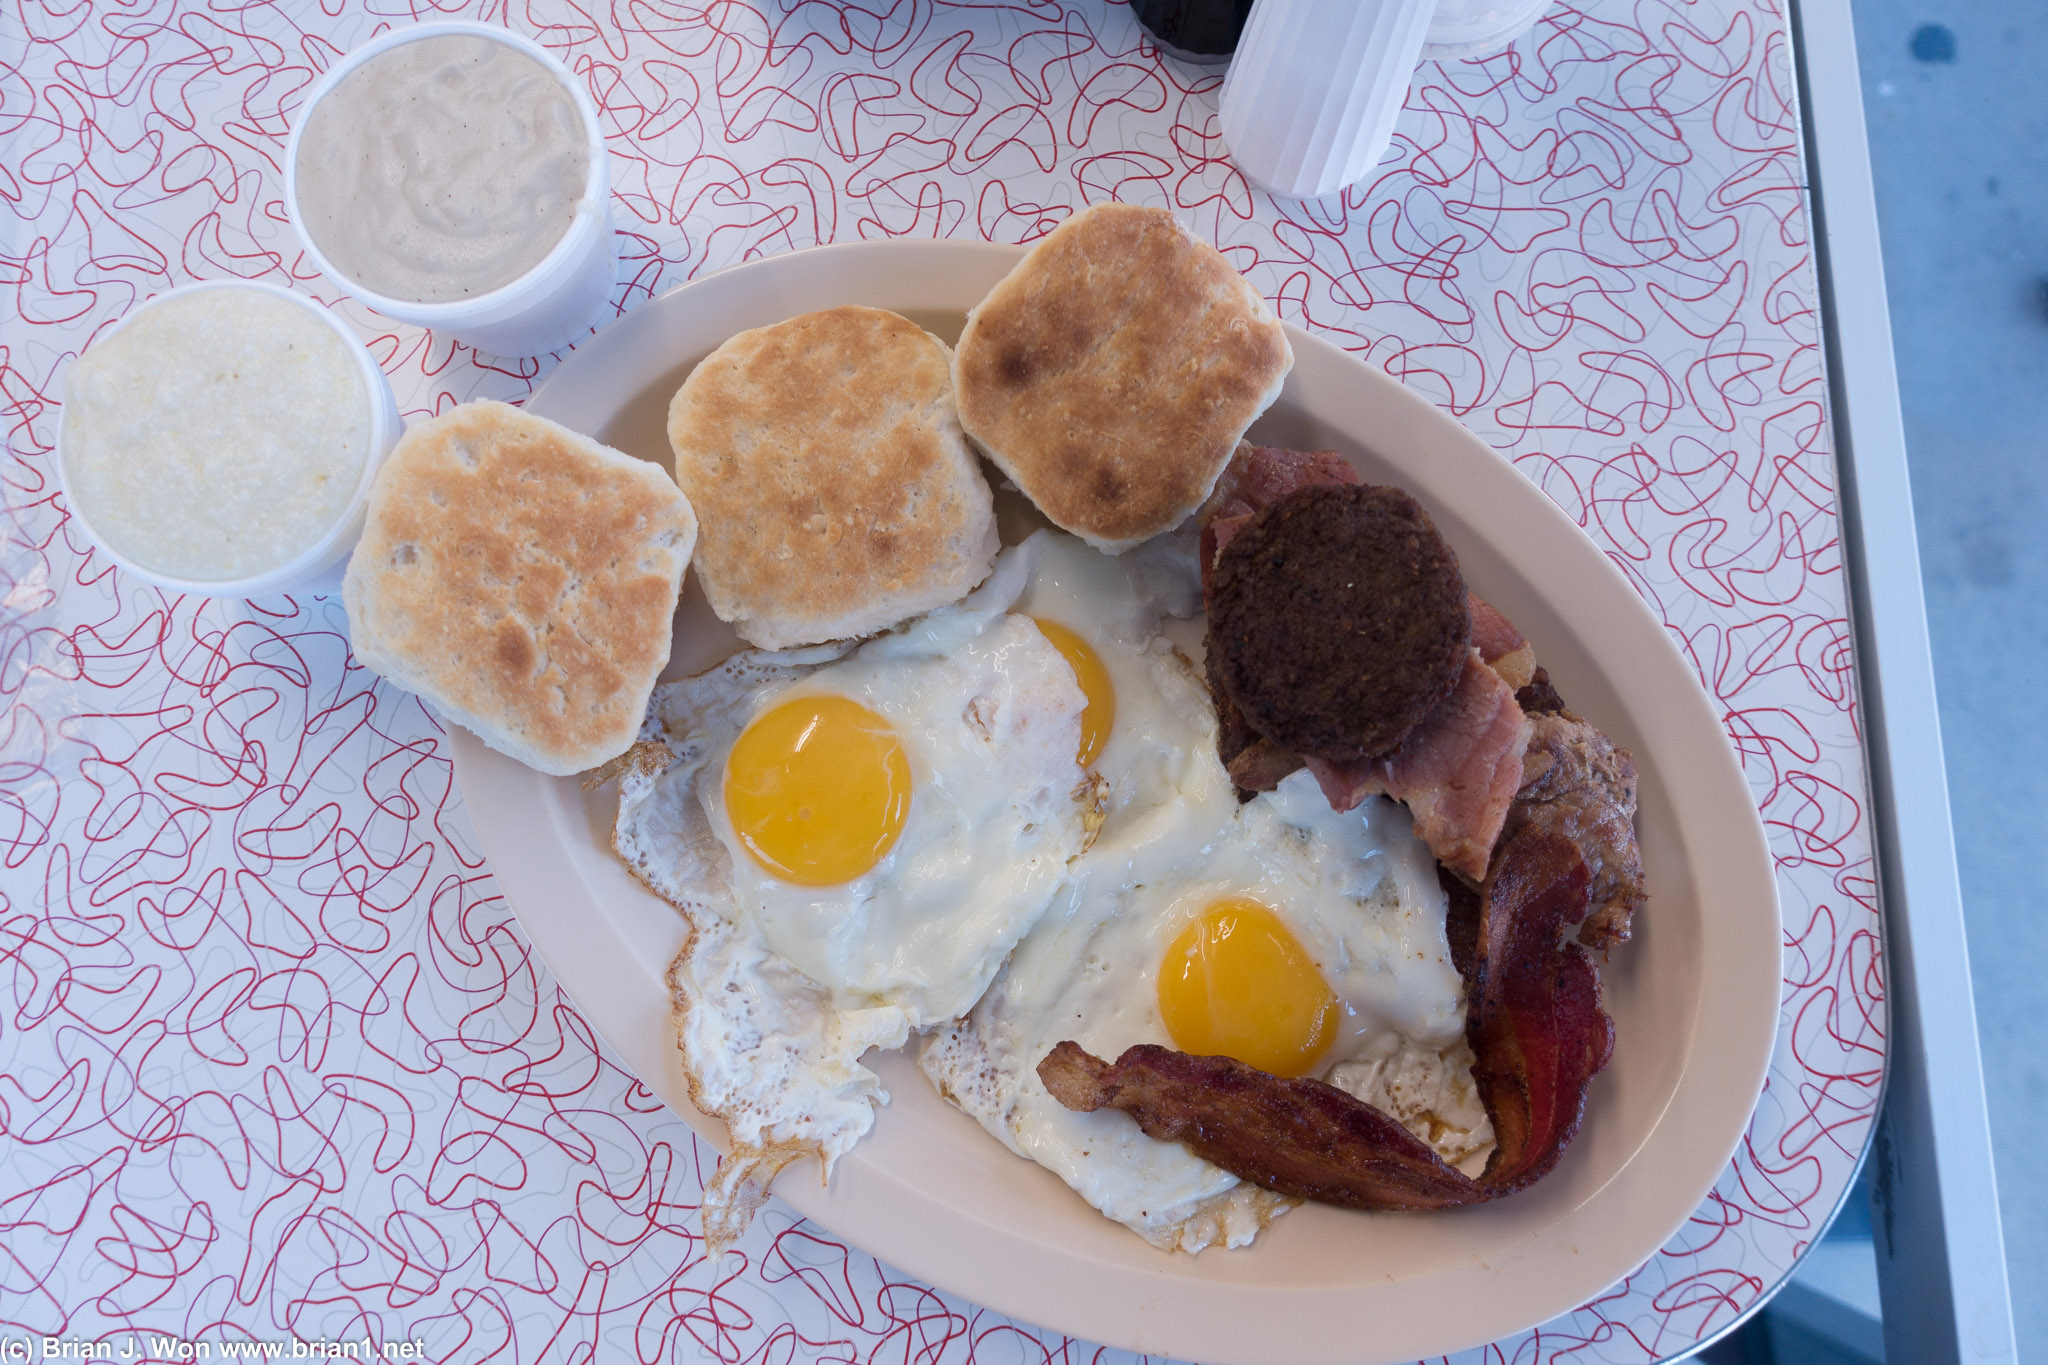 The sampler. Biscuits, three eggs, bacon, potato patty, country ham, bit of pork chop... no wonder Americans are fat.